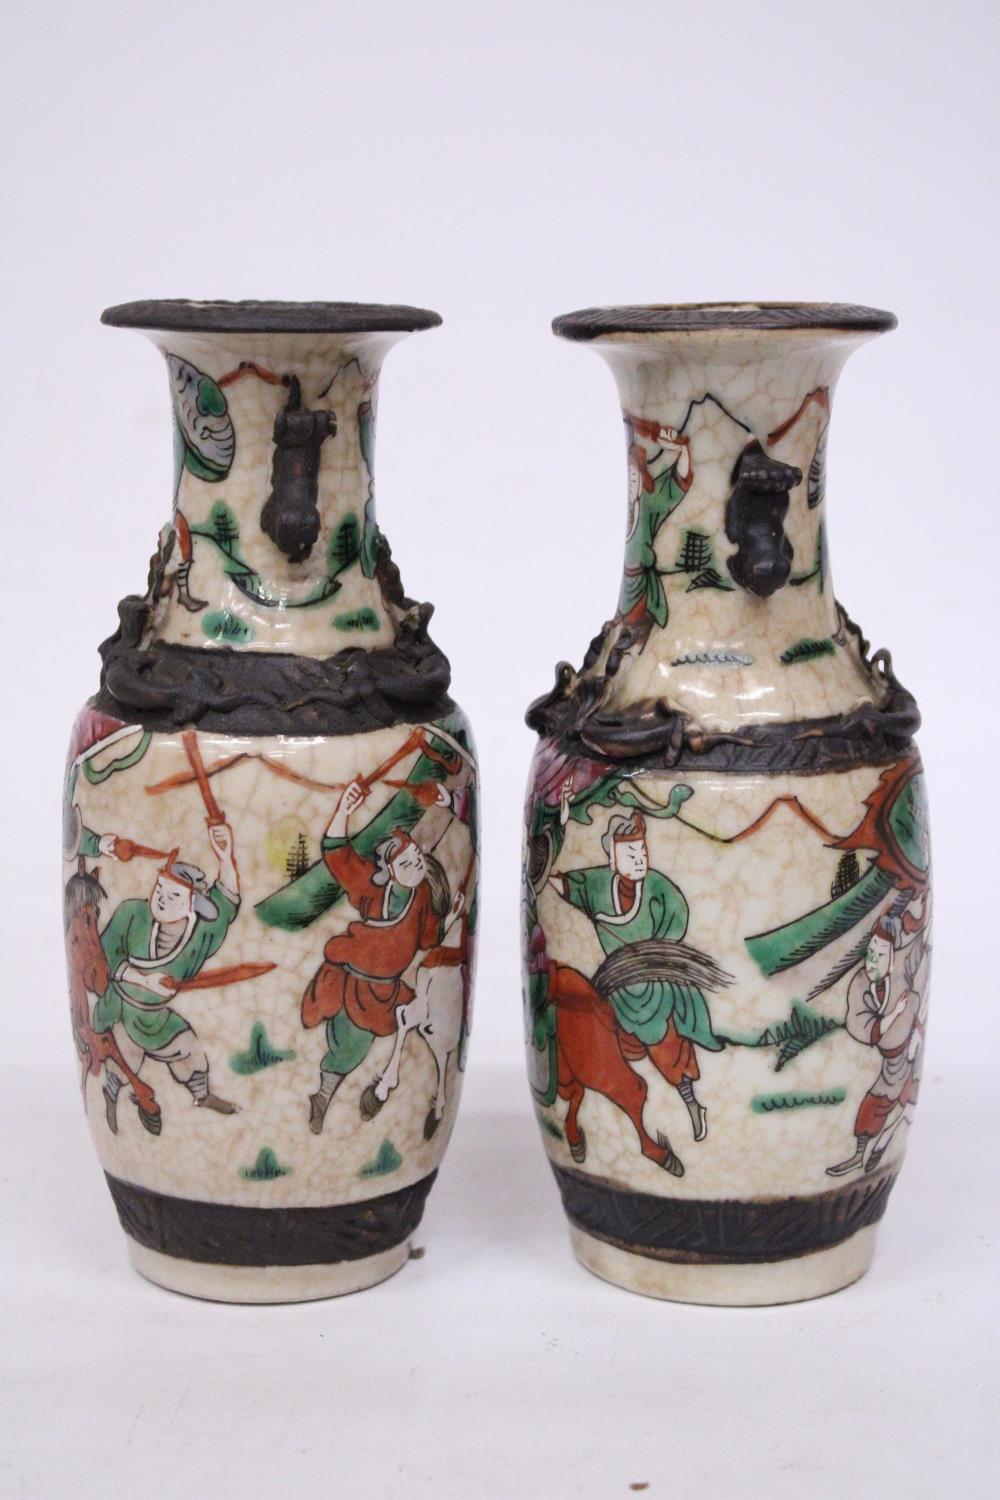 A PAIR OF CHINESE CRACKLE GLAZED VASES WITH WARRIOR SCENES - 18 CM (H) - MARK TO BASE - Image 2 of 6